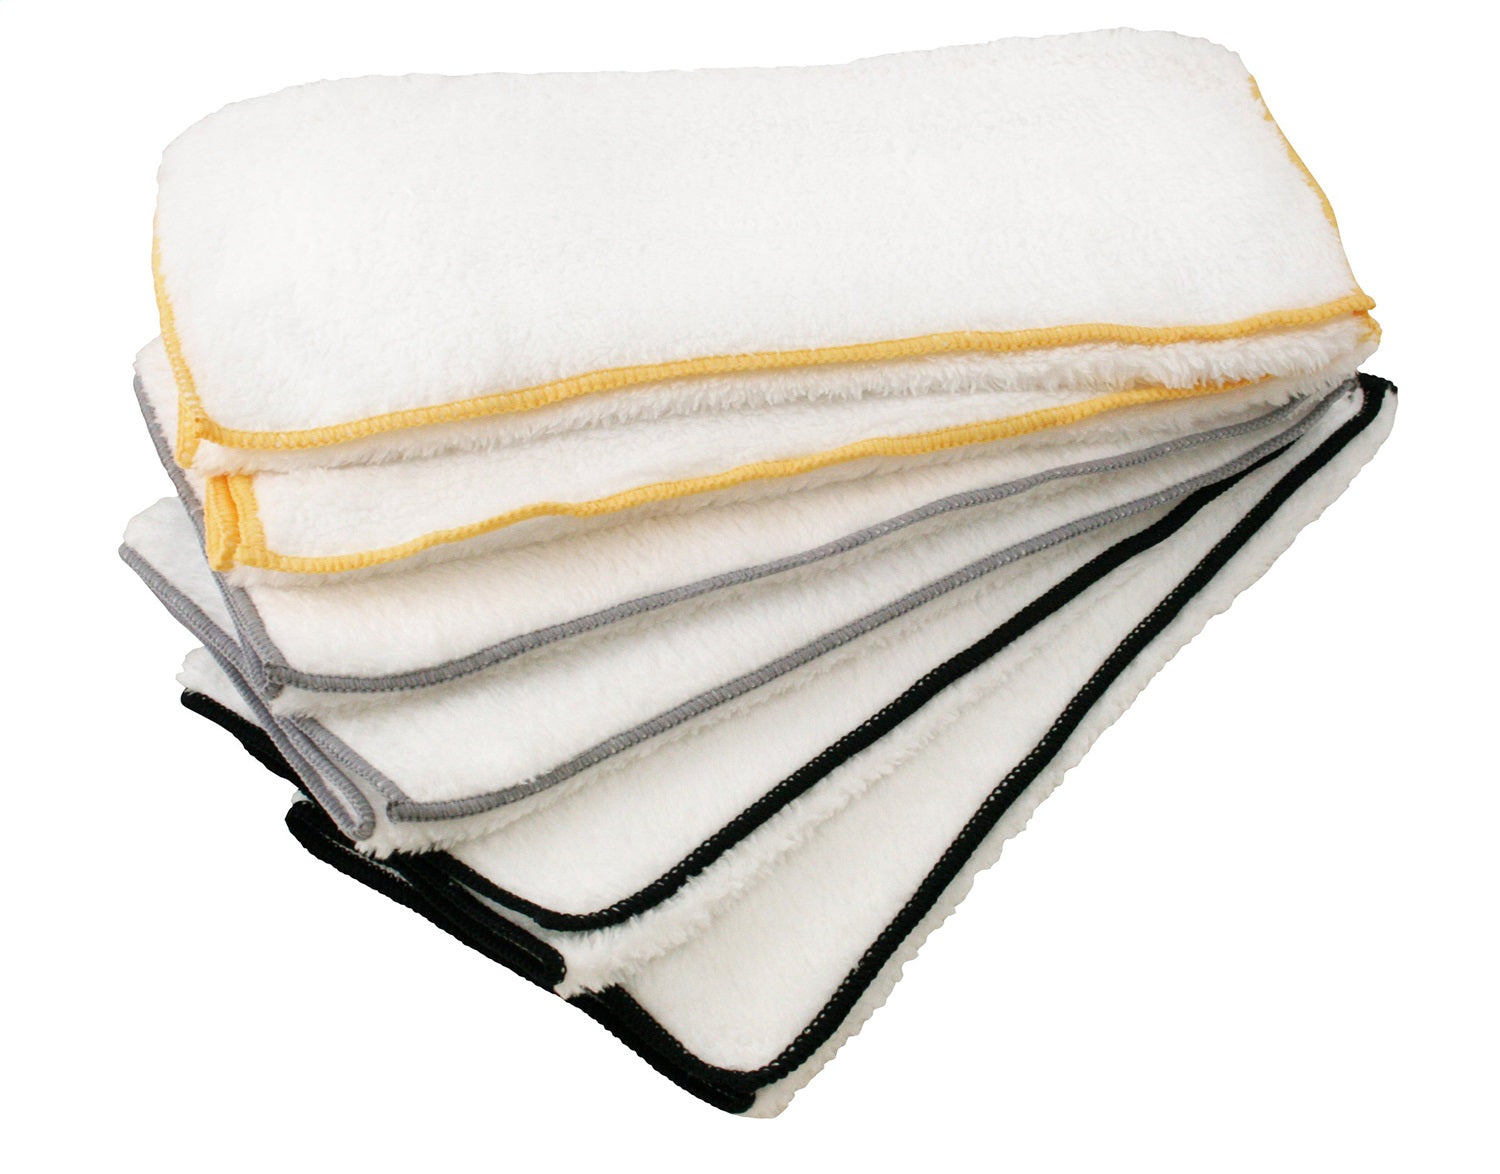 Carrand 45625AS Spa-Soft Detailing Towels